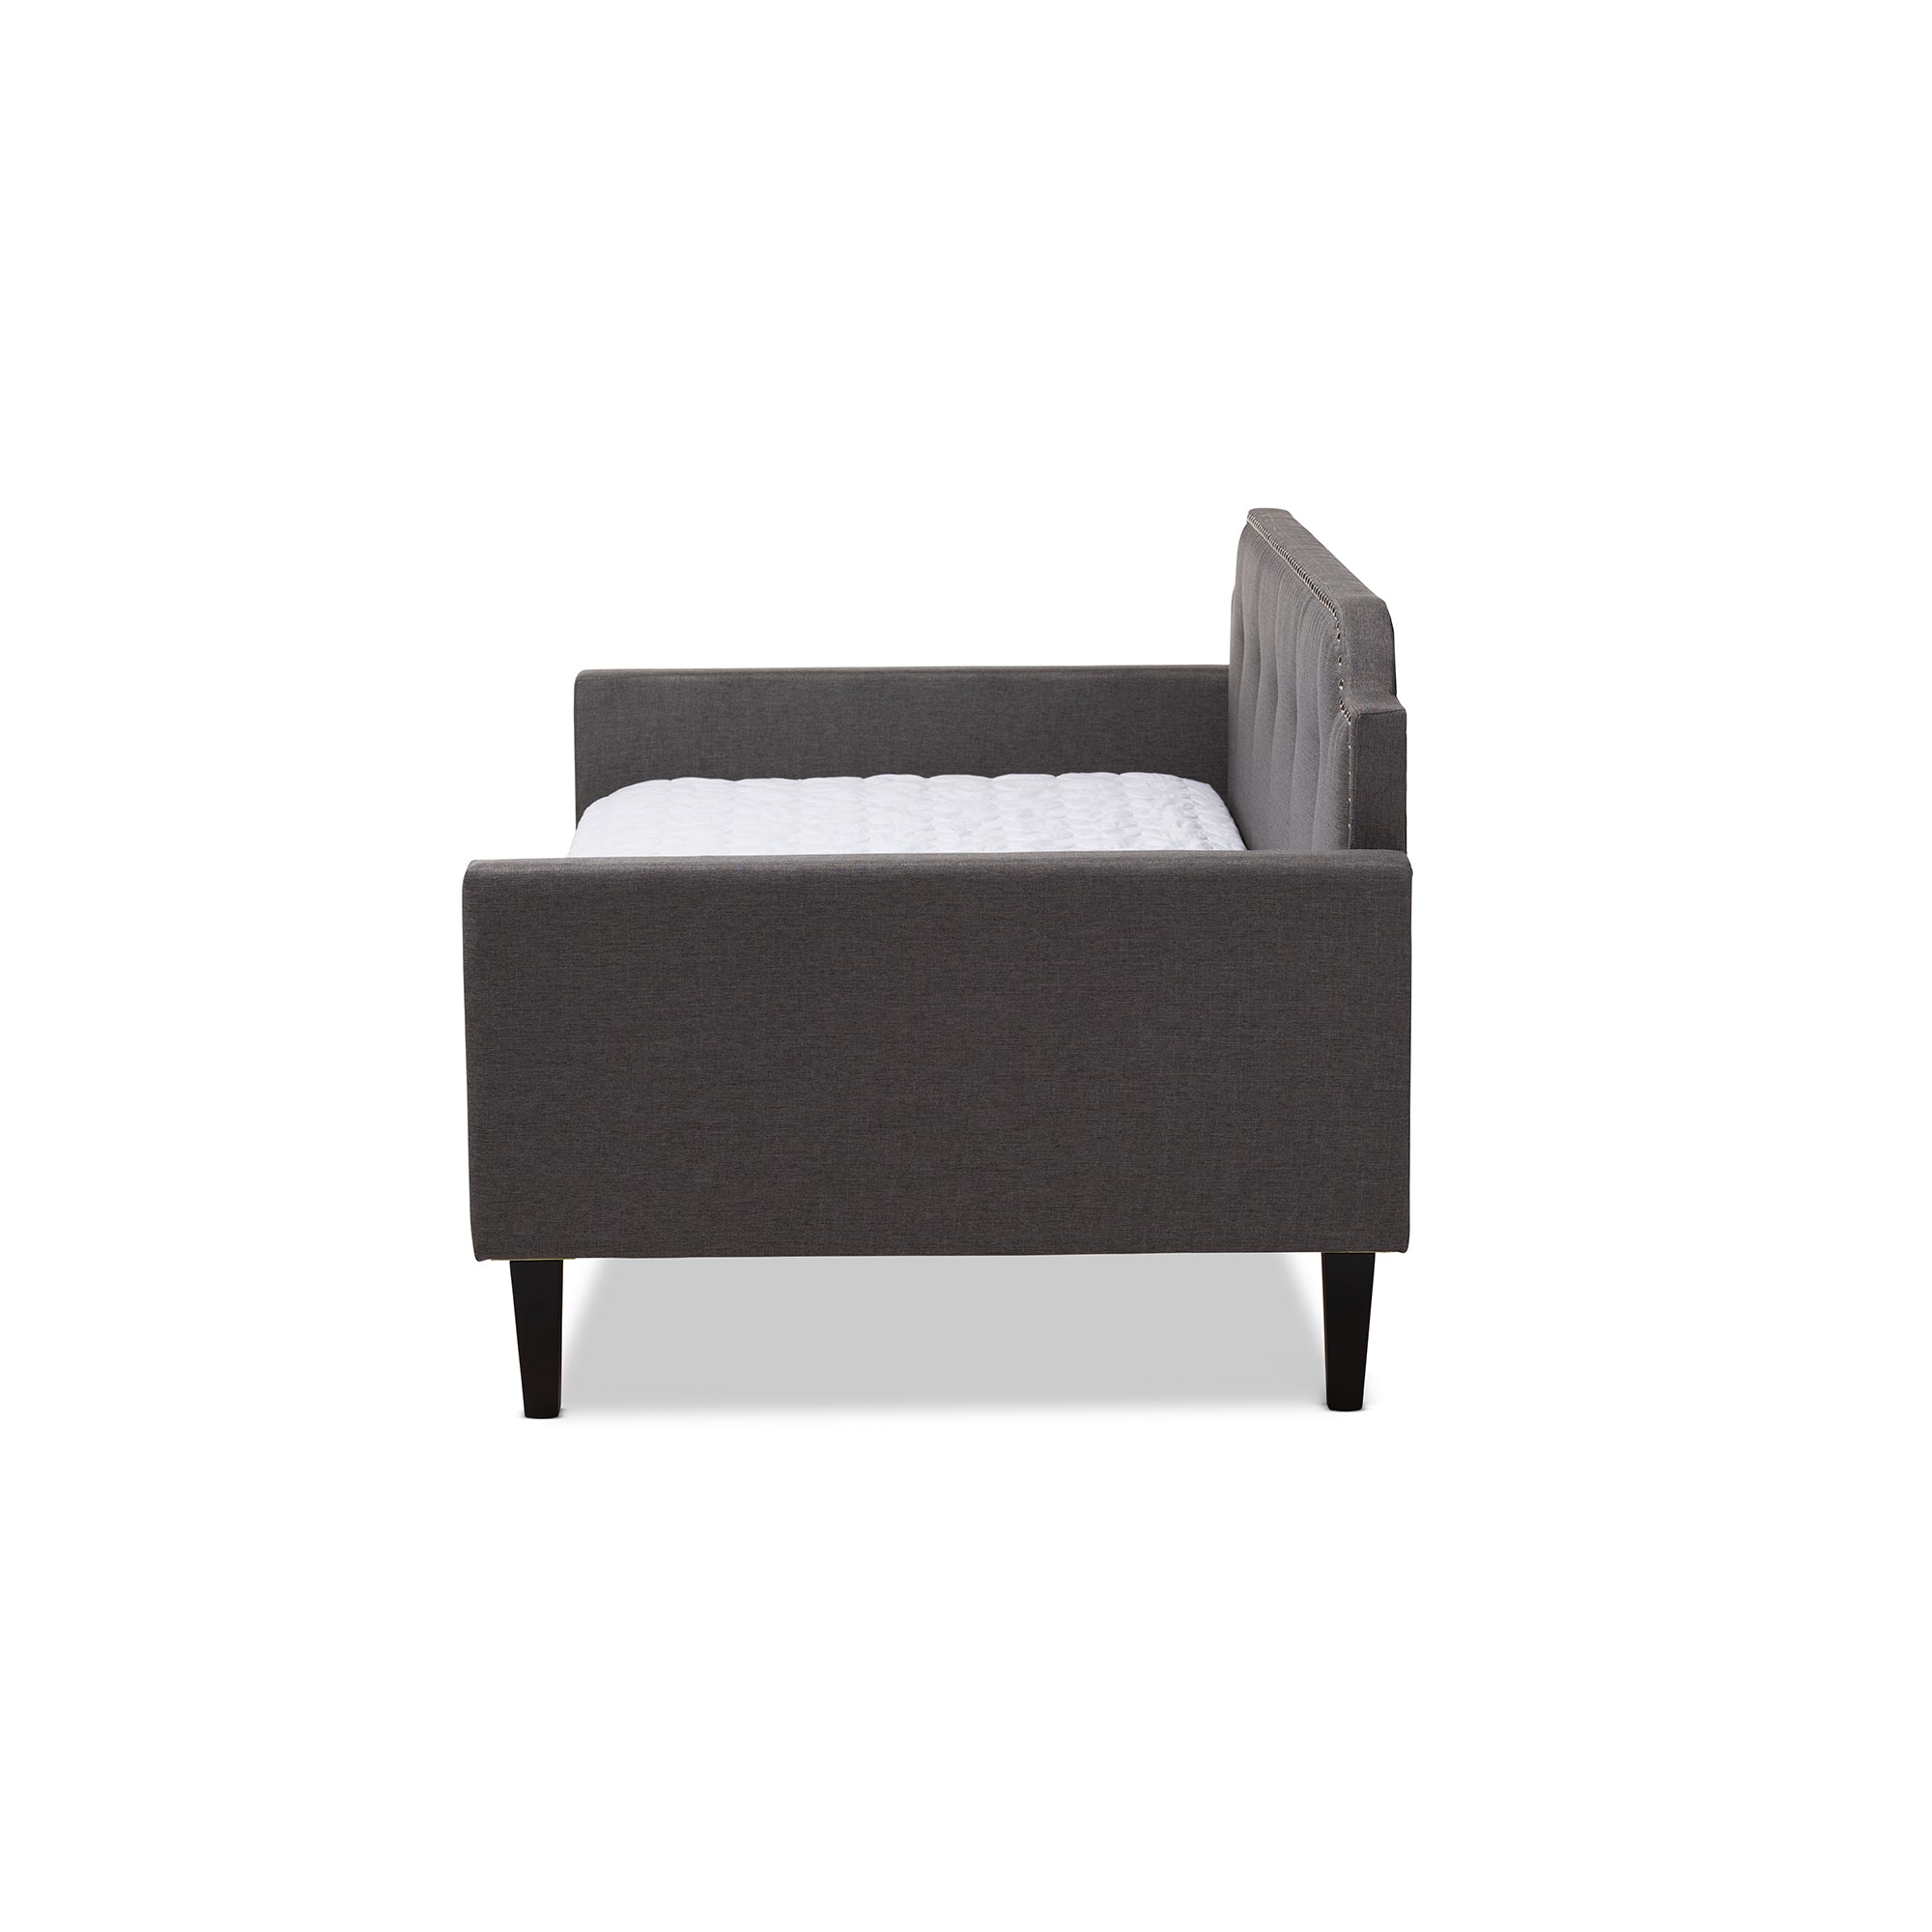 Packer Contemporary Daybed-Daybed-Baxton Studio - WI-Wall2Wall Furnishings